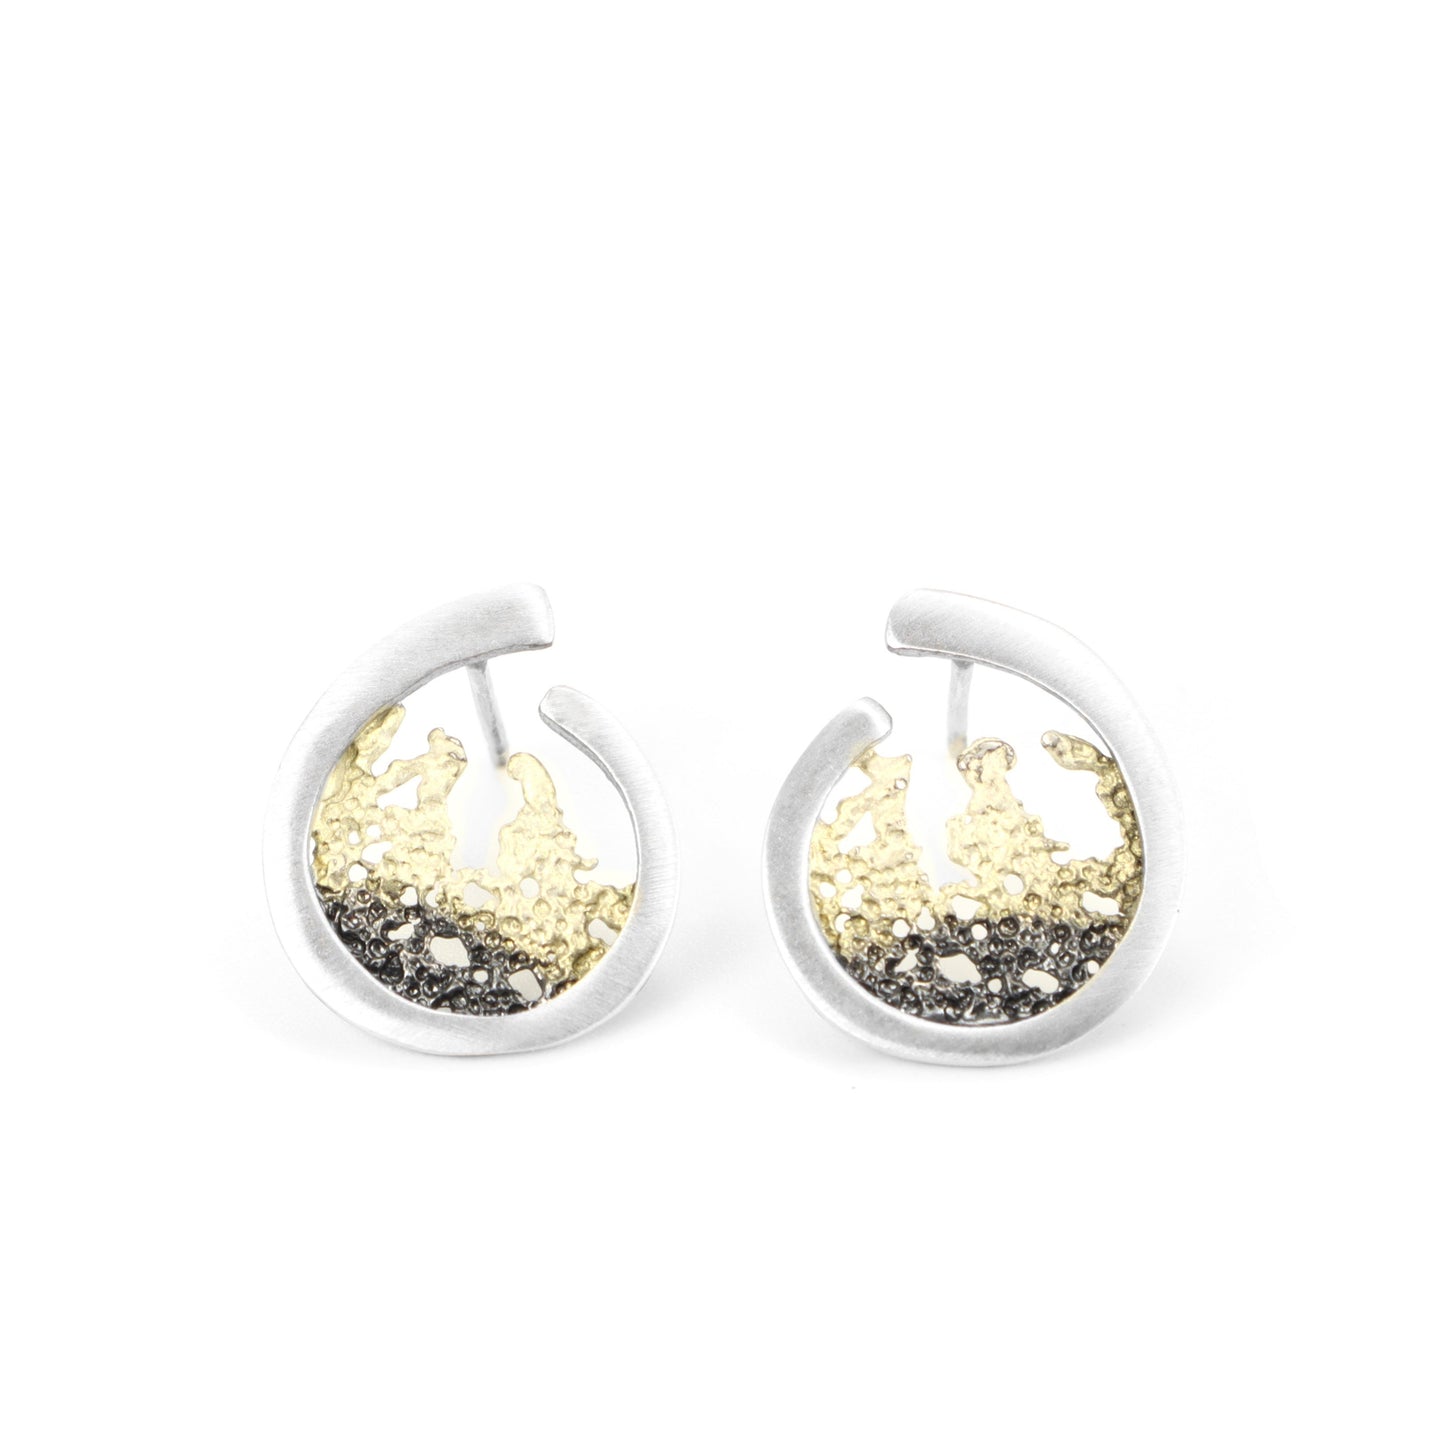 orfega wave earrings in gold, sterling silver and natural pigments